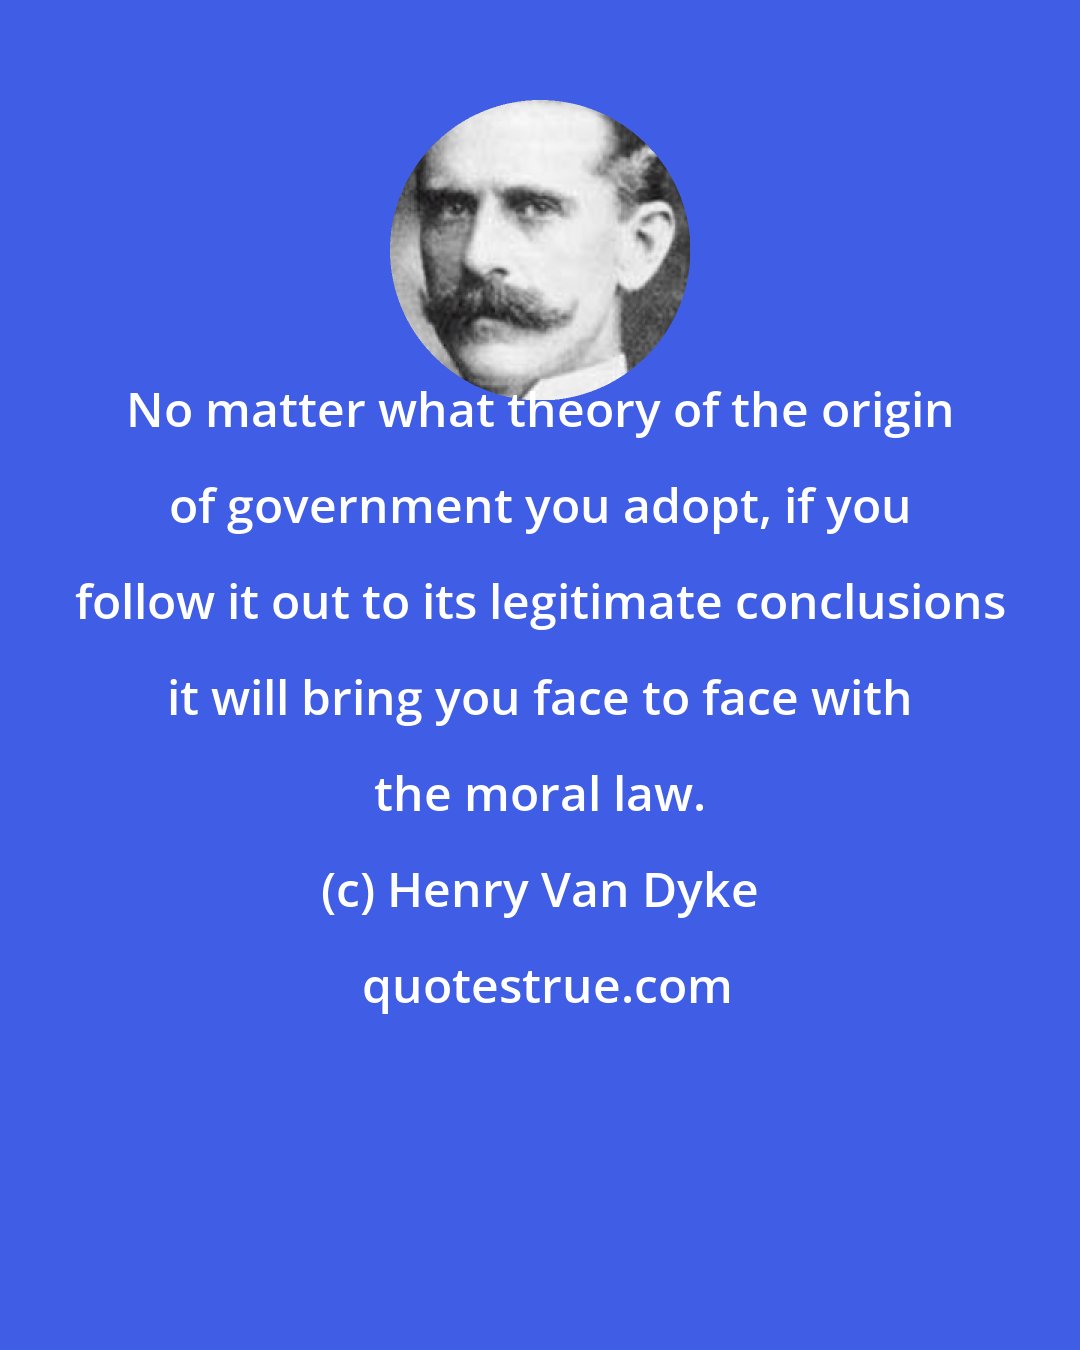 Henry Van Dyke: No matter what theory of the origin of government you adopt, if you follow it out to its legitimate conclusions it will bring you face to face with the moral law.